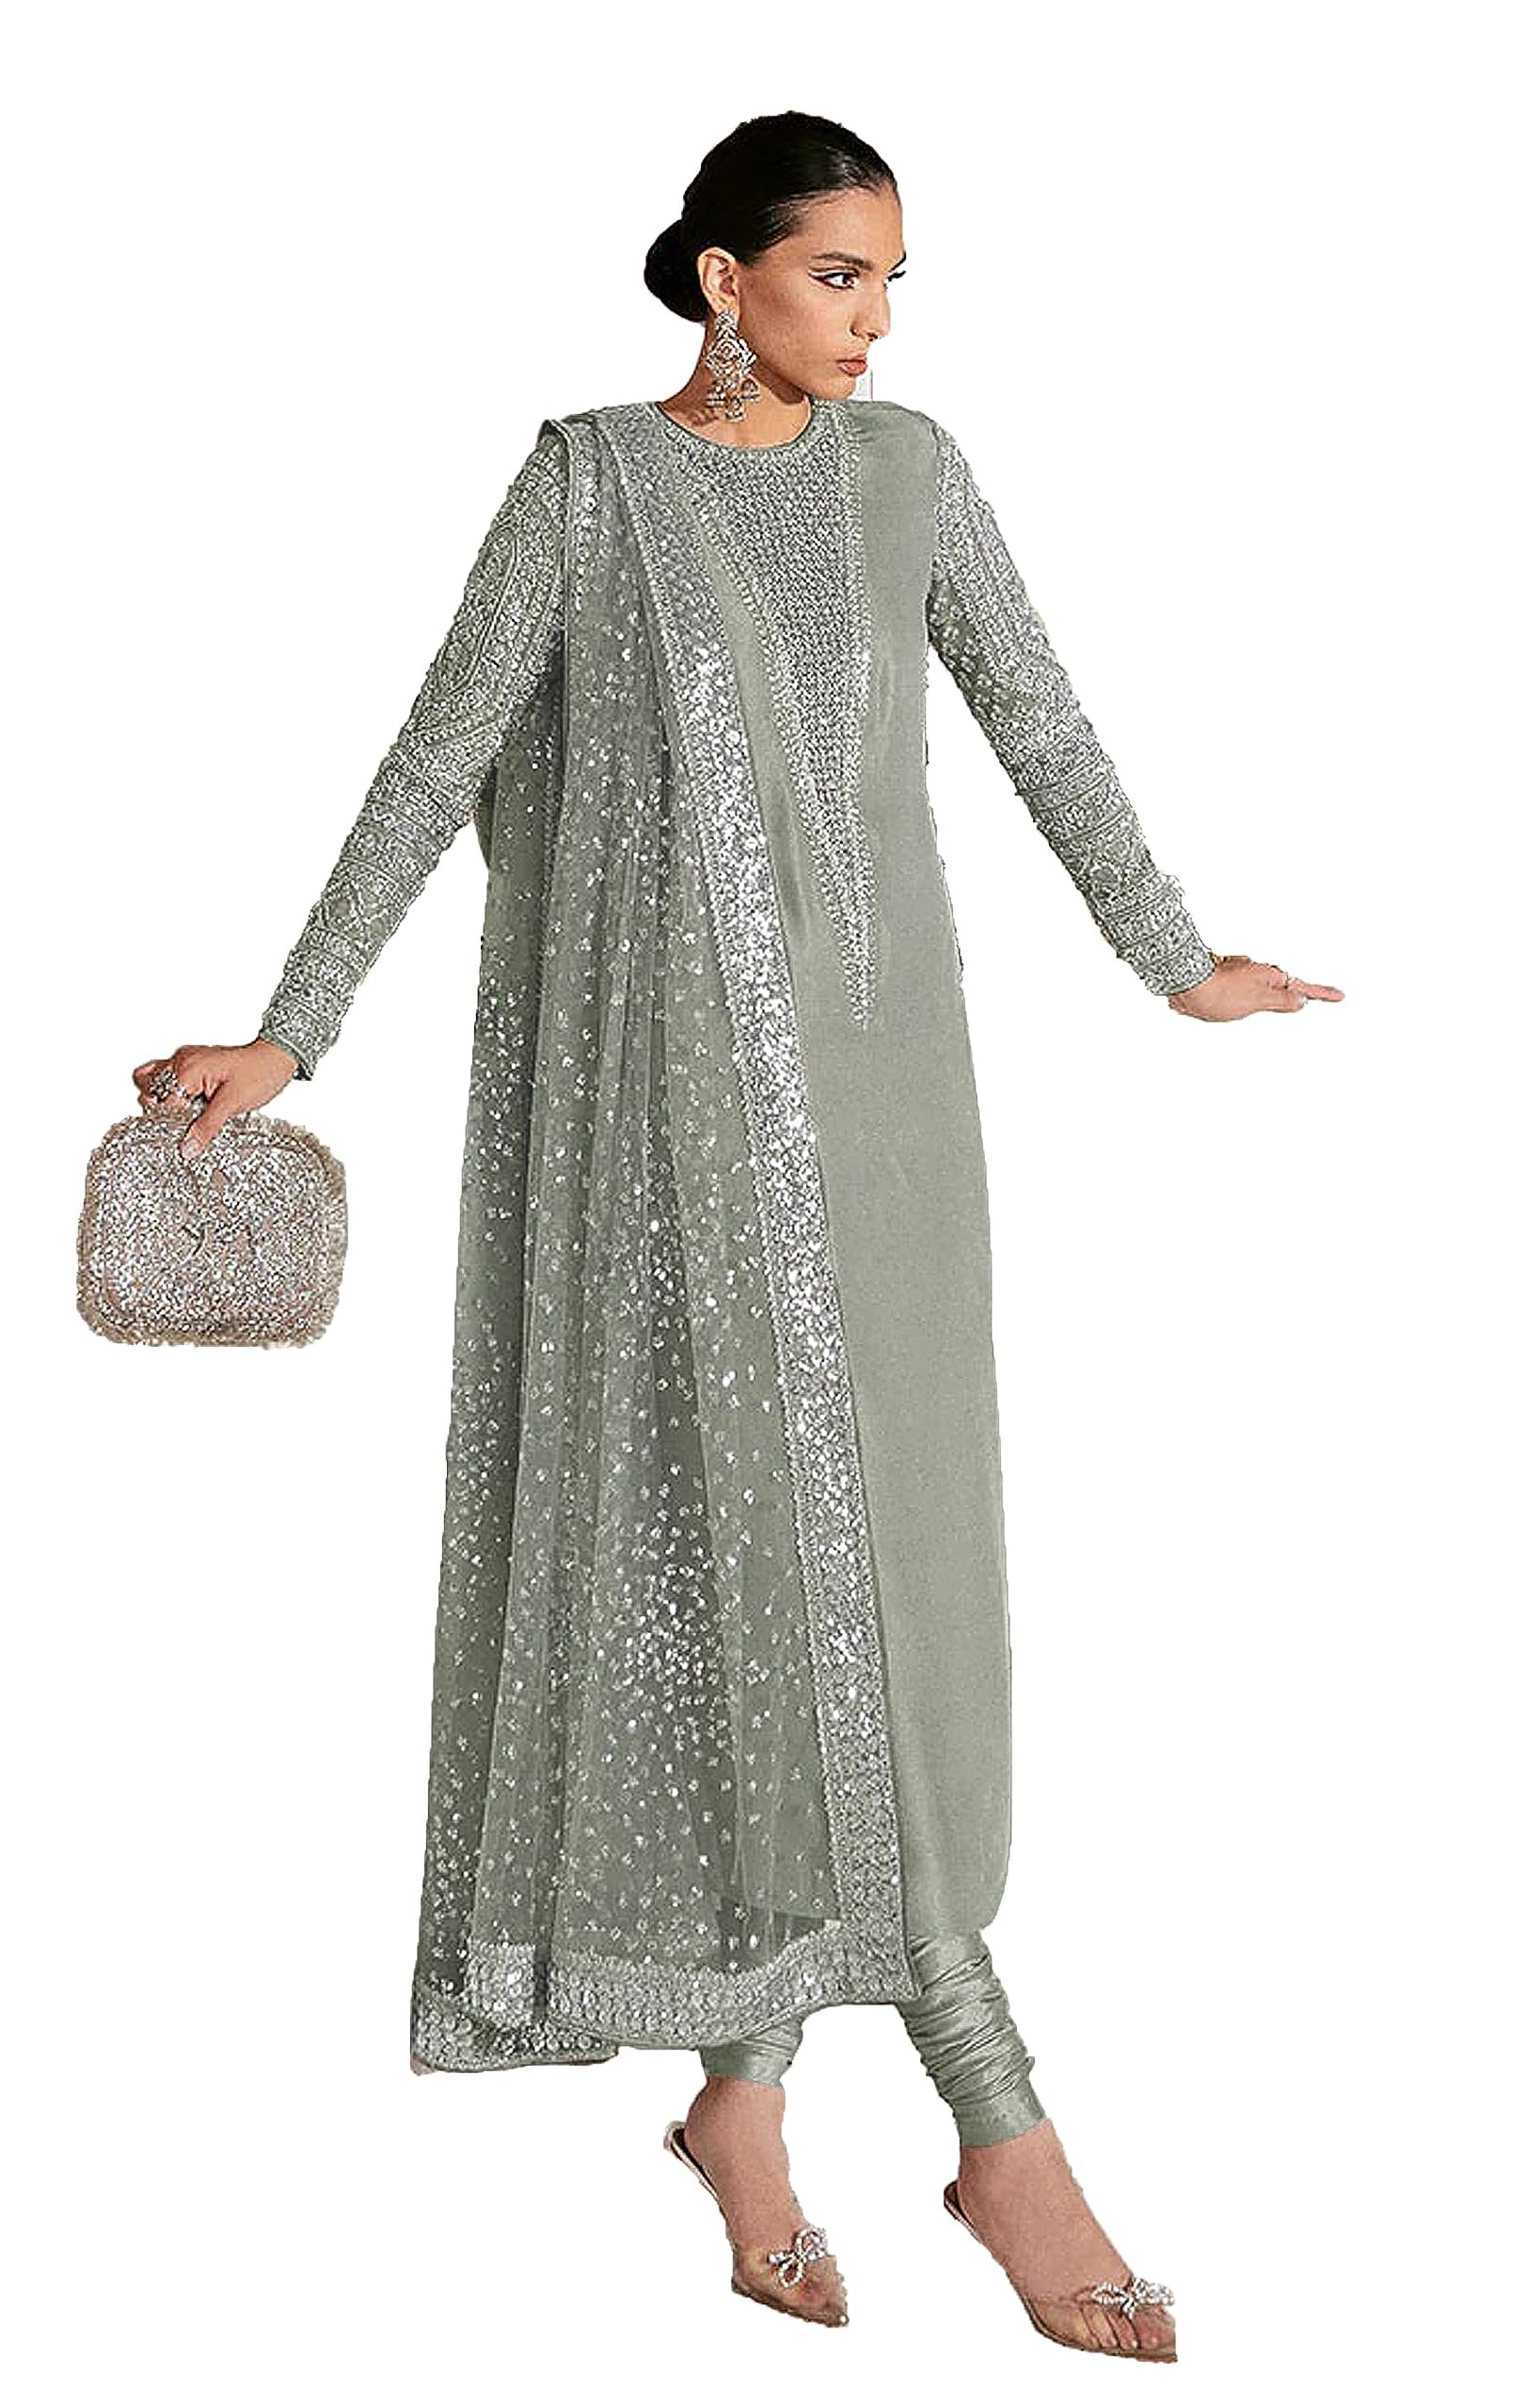 STELLACOUTURE women's ready to wear embroidered plus size eid festival pakistani salwar kameez suit for women 1026-O